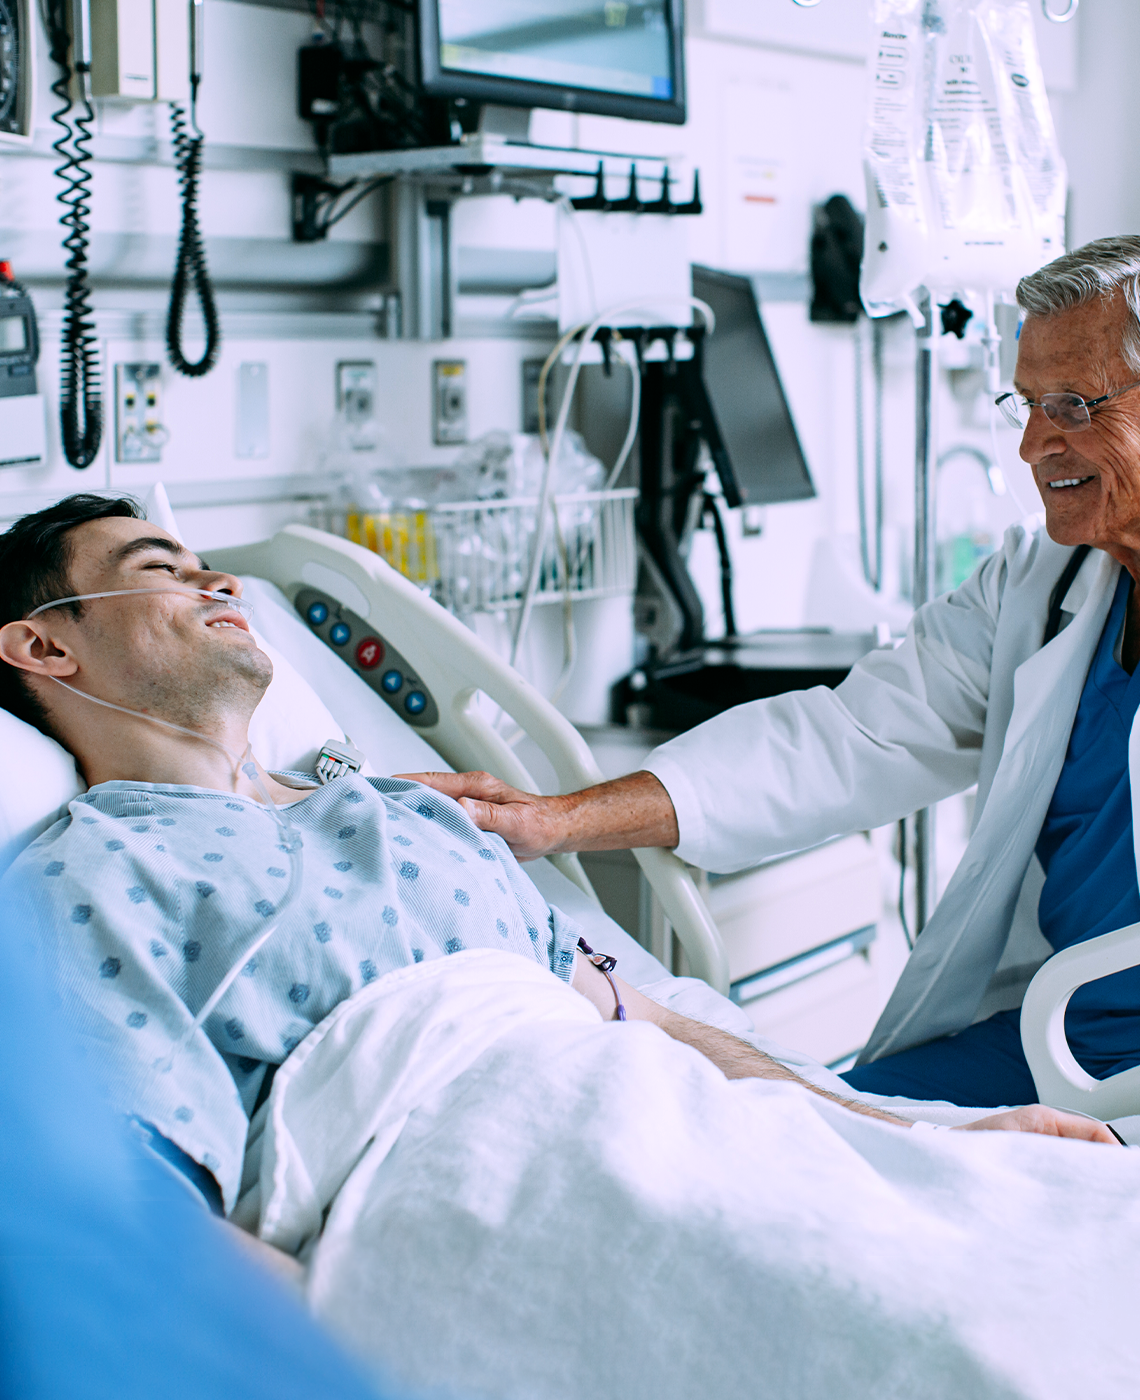 Healthcare professional assisting a patient in a hospital bed